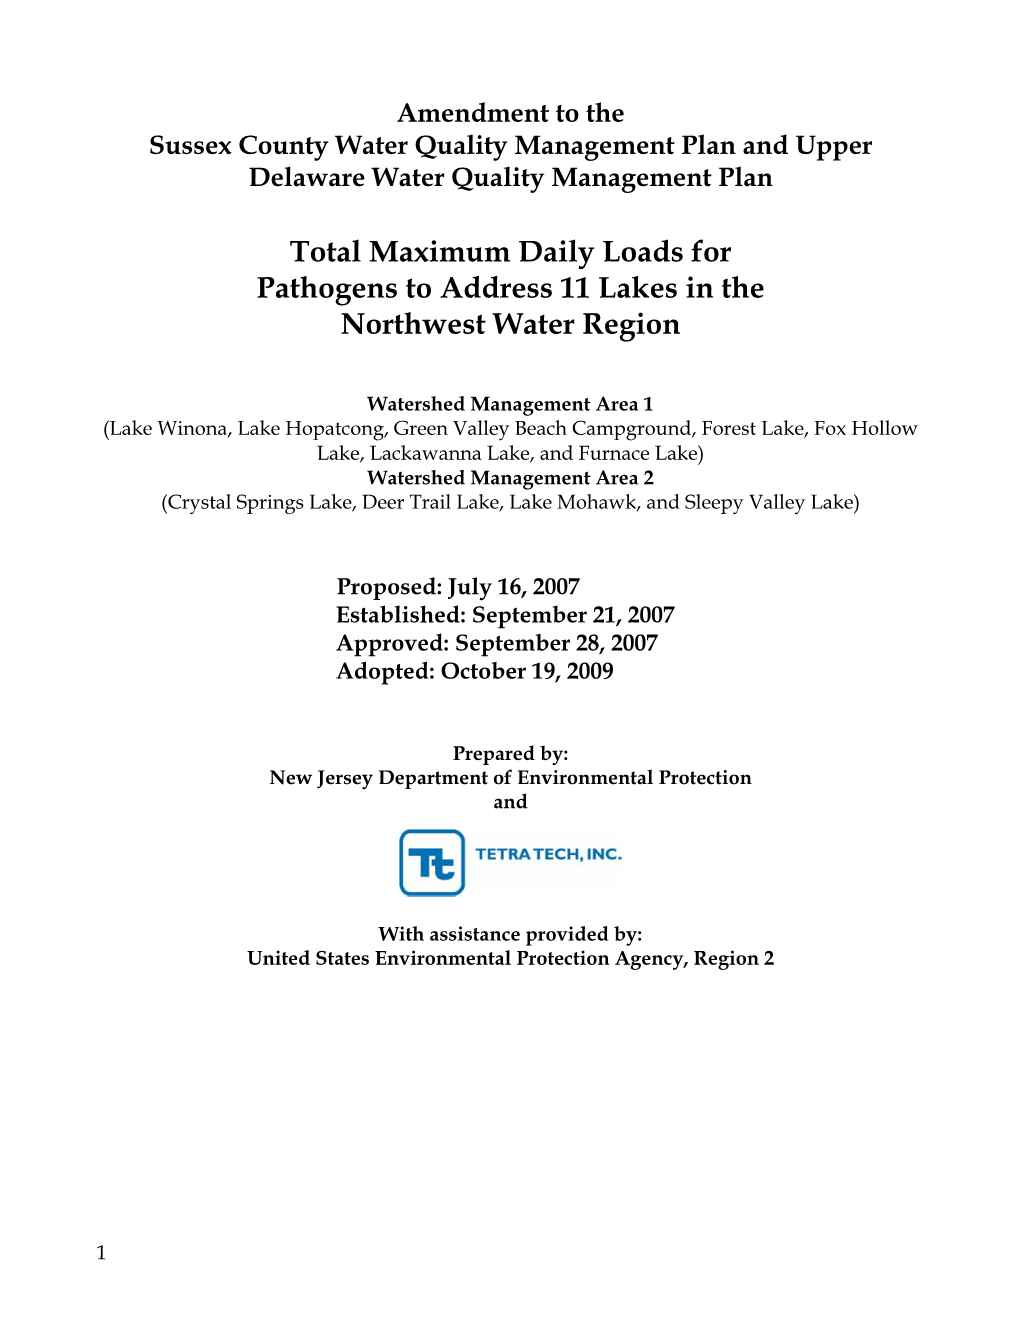 Total Maximum Daily Loads for Pathogens to Address 11 Lakes in the Northwest Water Region